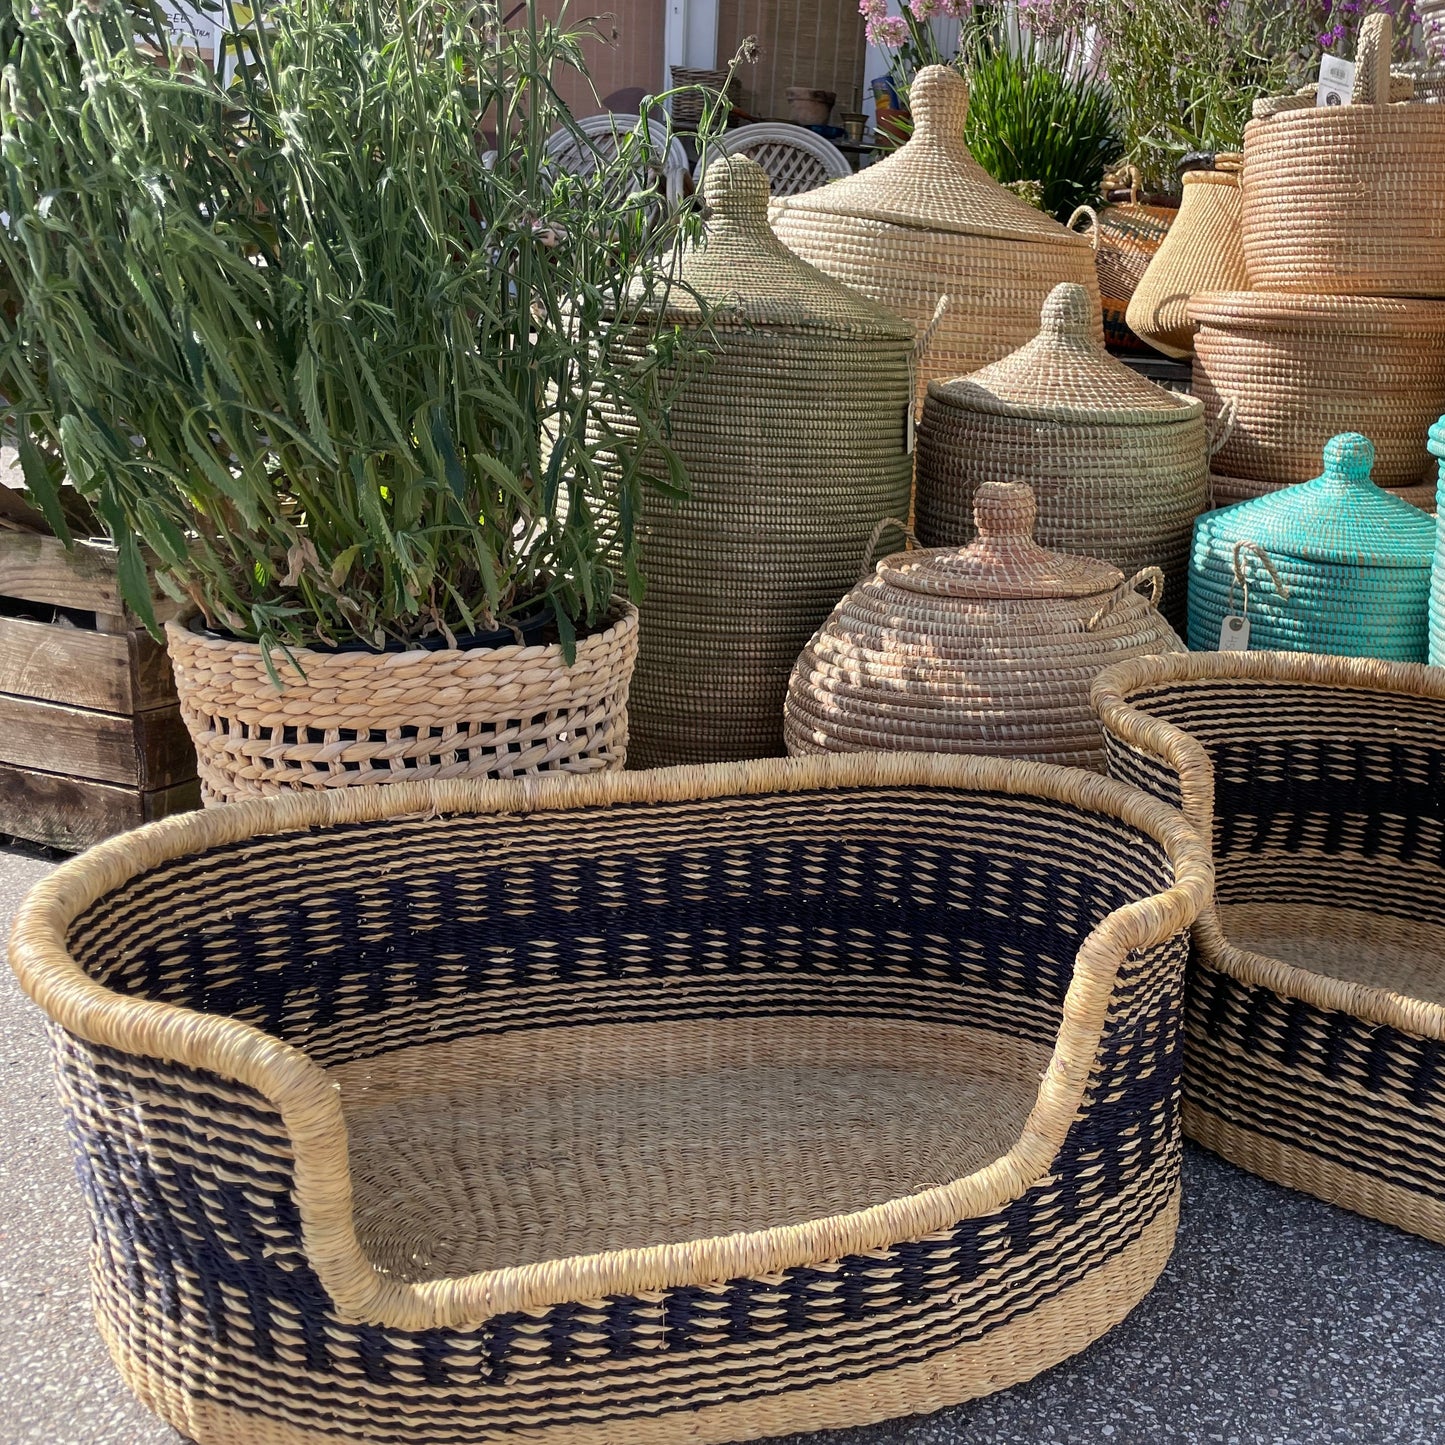 Dog basket in three sizes woven in sea grass. Carry goods and Fair Trade from Ghana